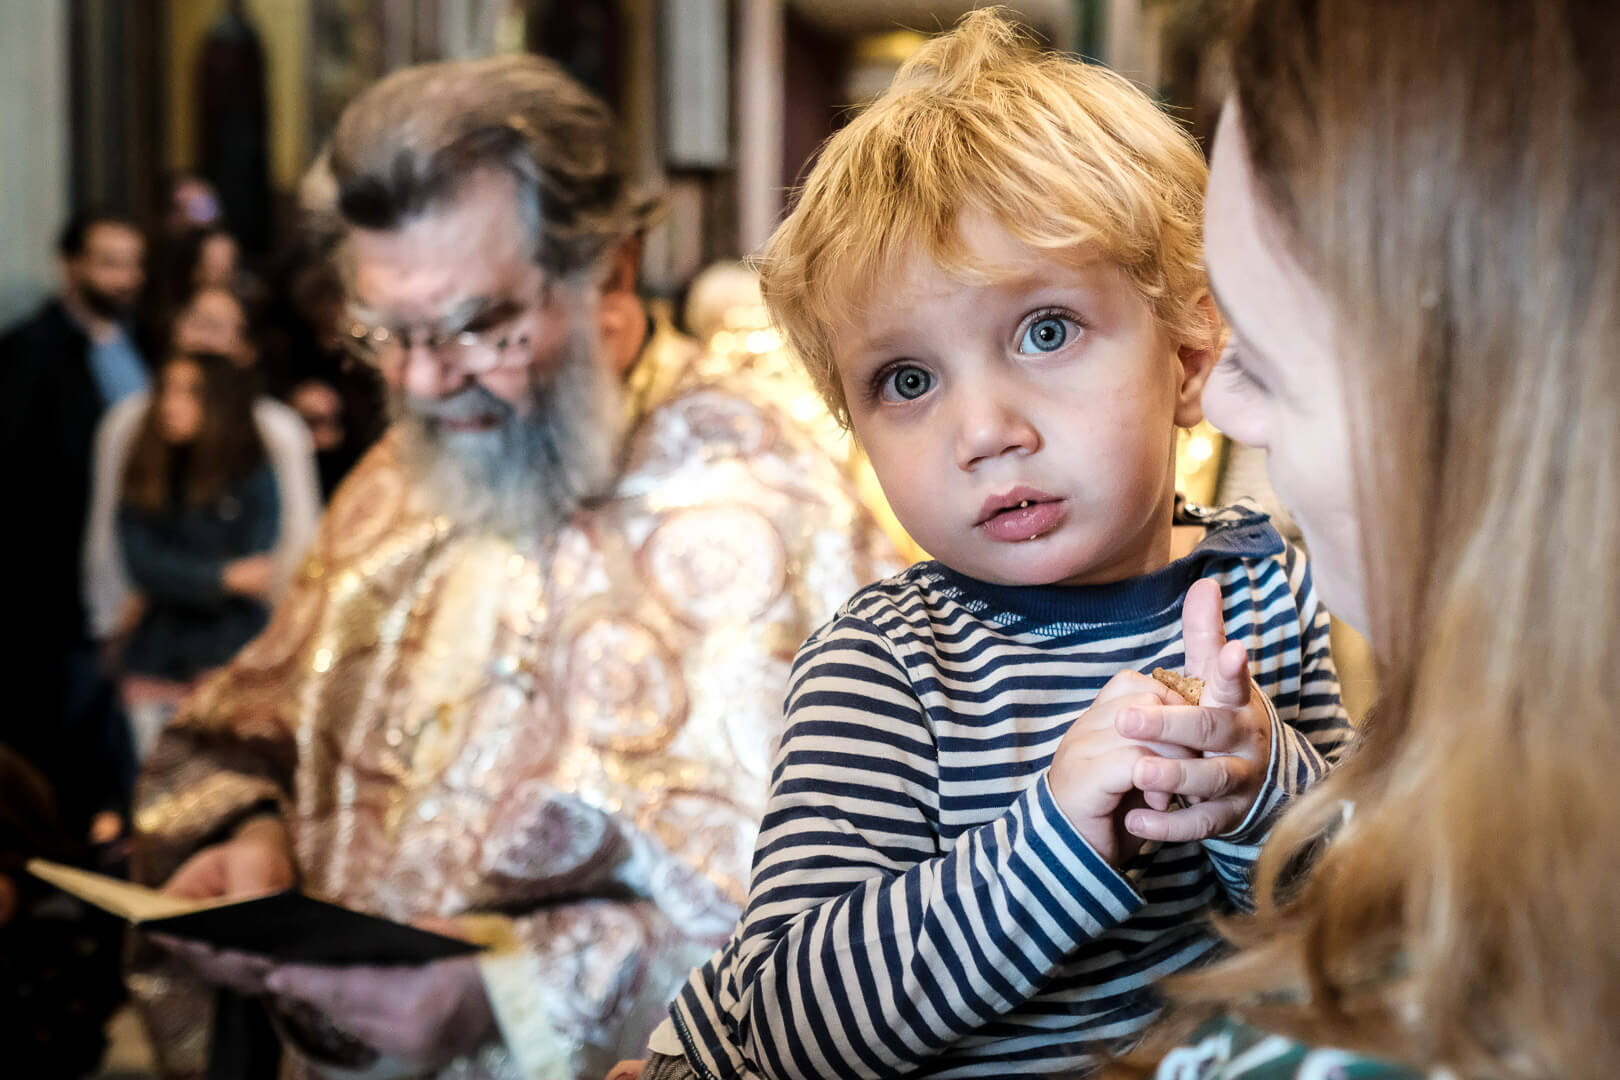 Captivated by faith: a child's innocent gaze takes in the sacred atmosphere of the ceremony. 